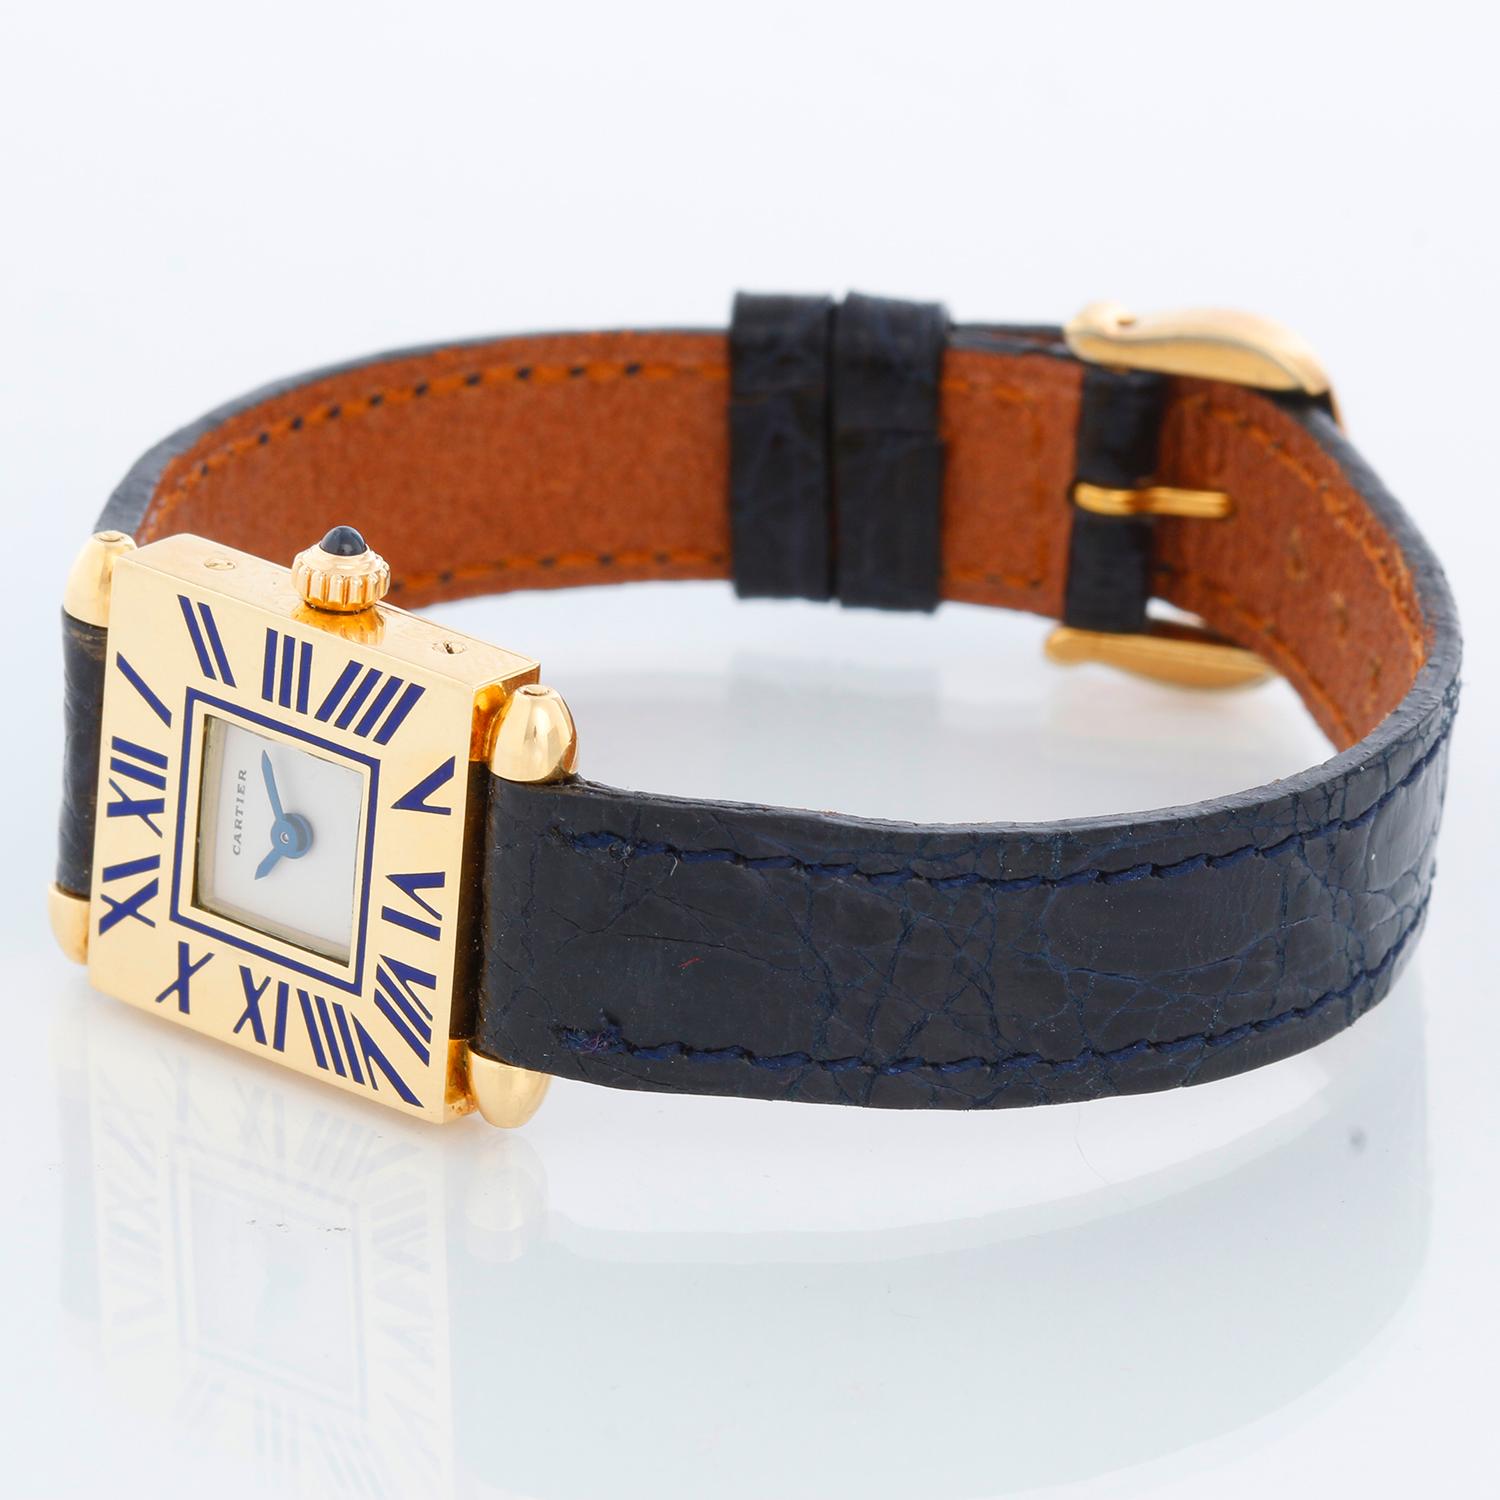 Cartier 18k Yellow Gold Quadrant Ladies Watch - Quartz. 18K Yellow gold (19 mm x 26 mm ) grained blue Roman numerals. White dial with blue hands. Blue Cartier strap with tang buckle. Pre-owned with Cartier pouch.